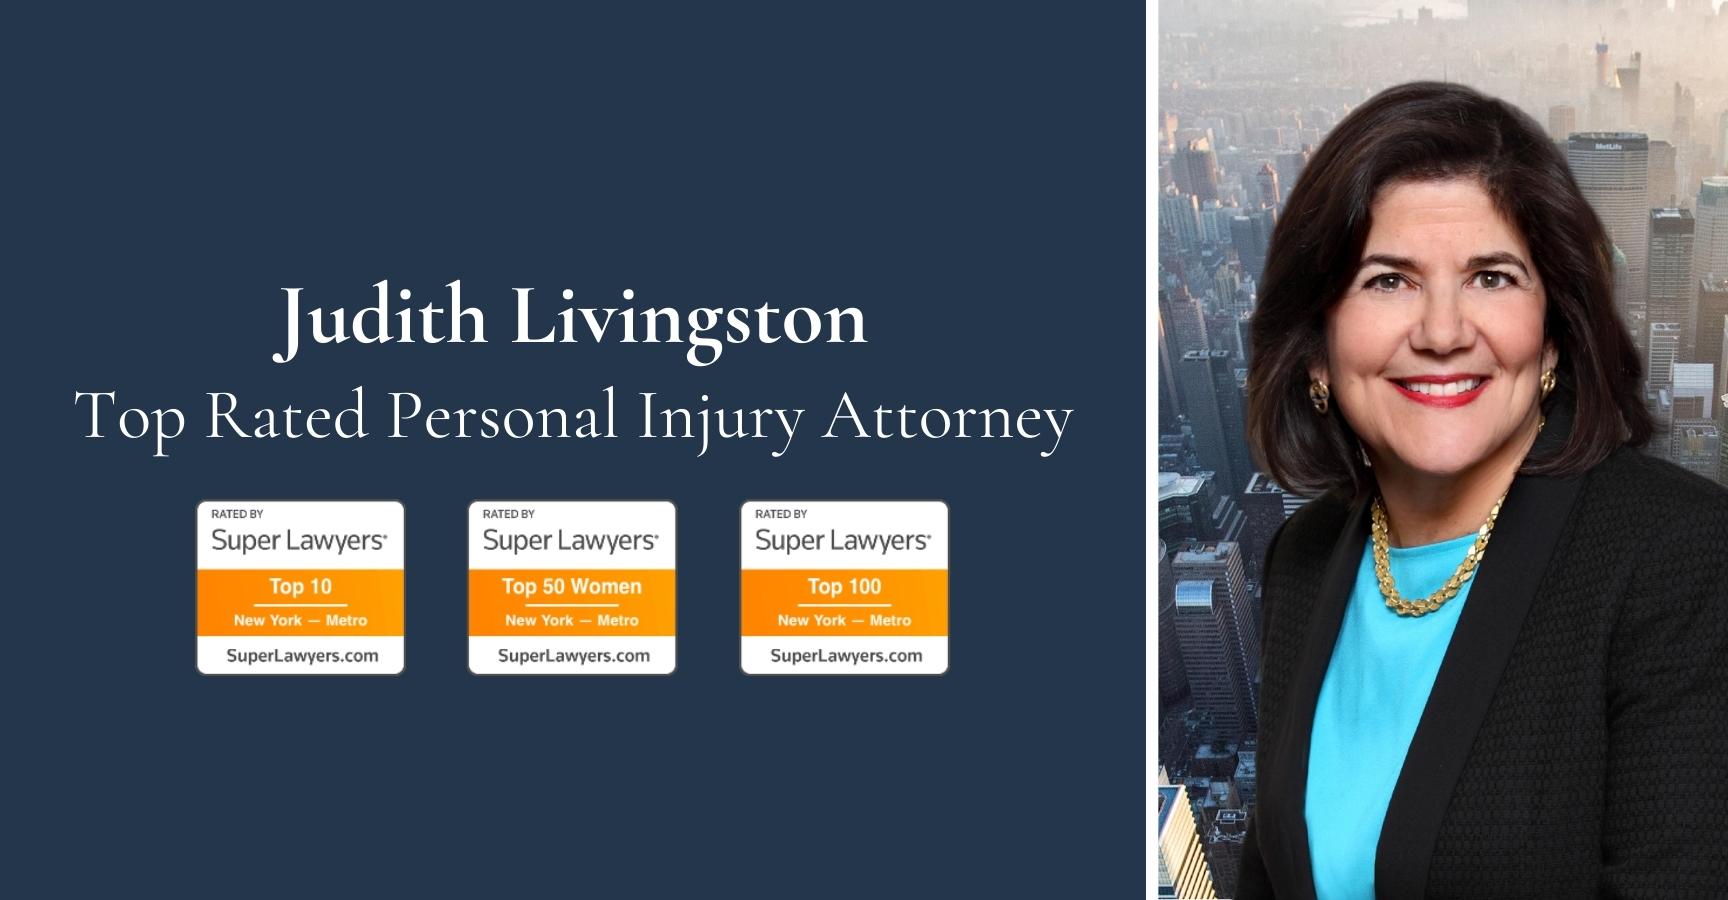 Top rated personal injury attorney.